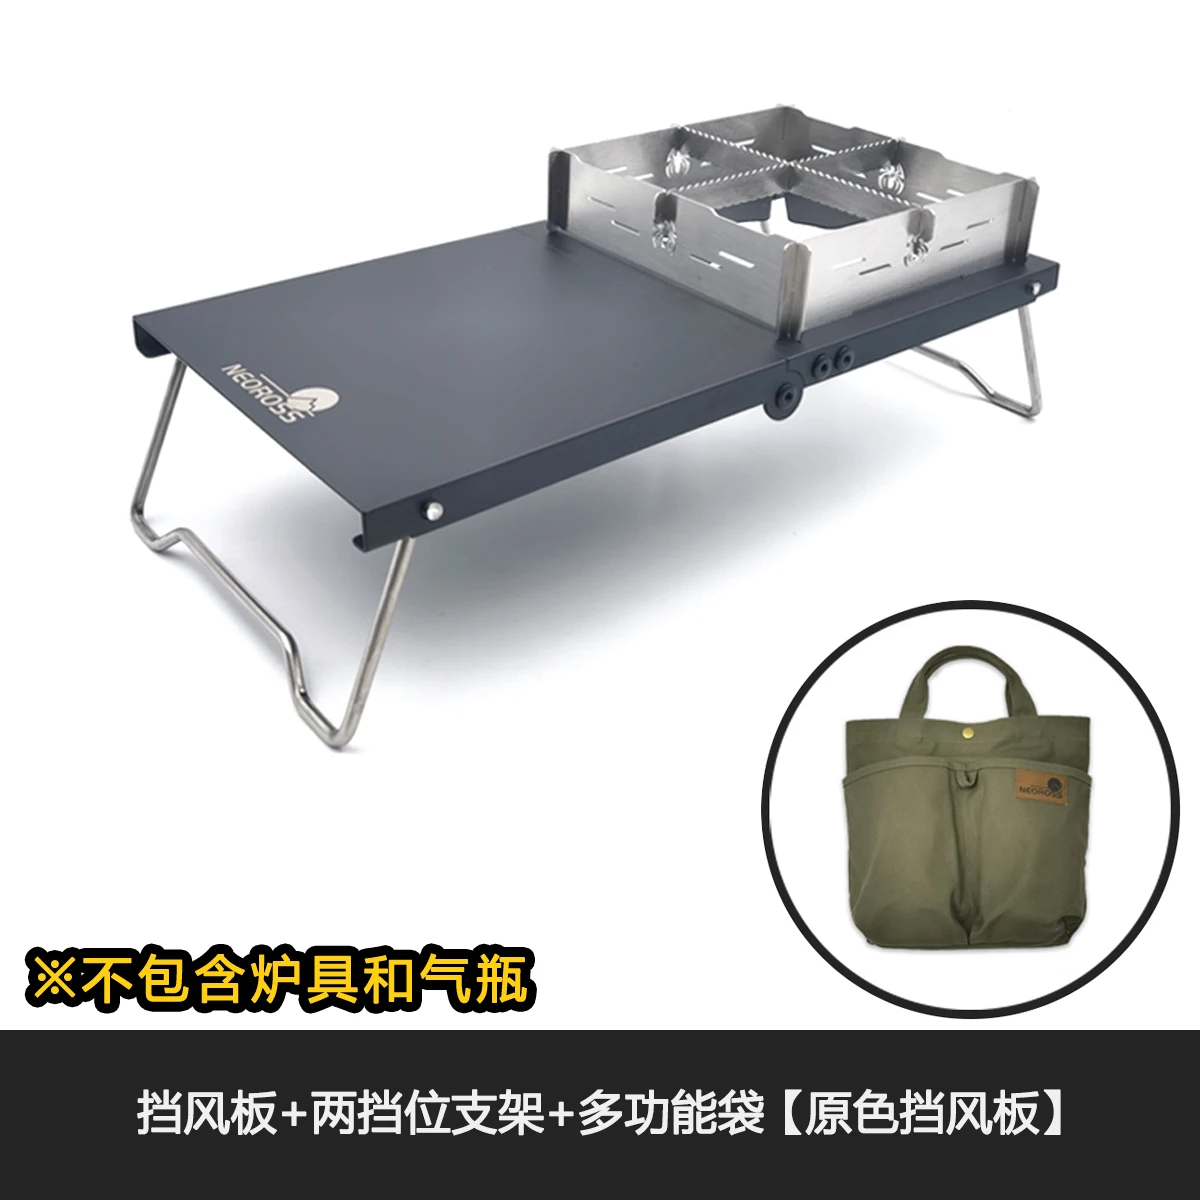 Outdoor ST 310 Camping Table Heat Shield Gas Stove Stand Camping Stove  Table SOTO 310 Stove Scalable Accessories - AliExpress